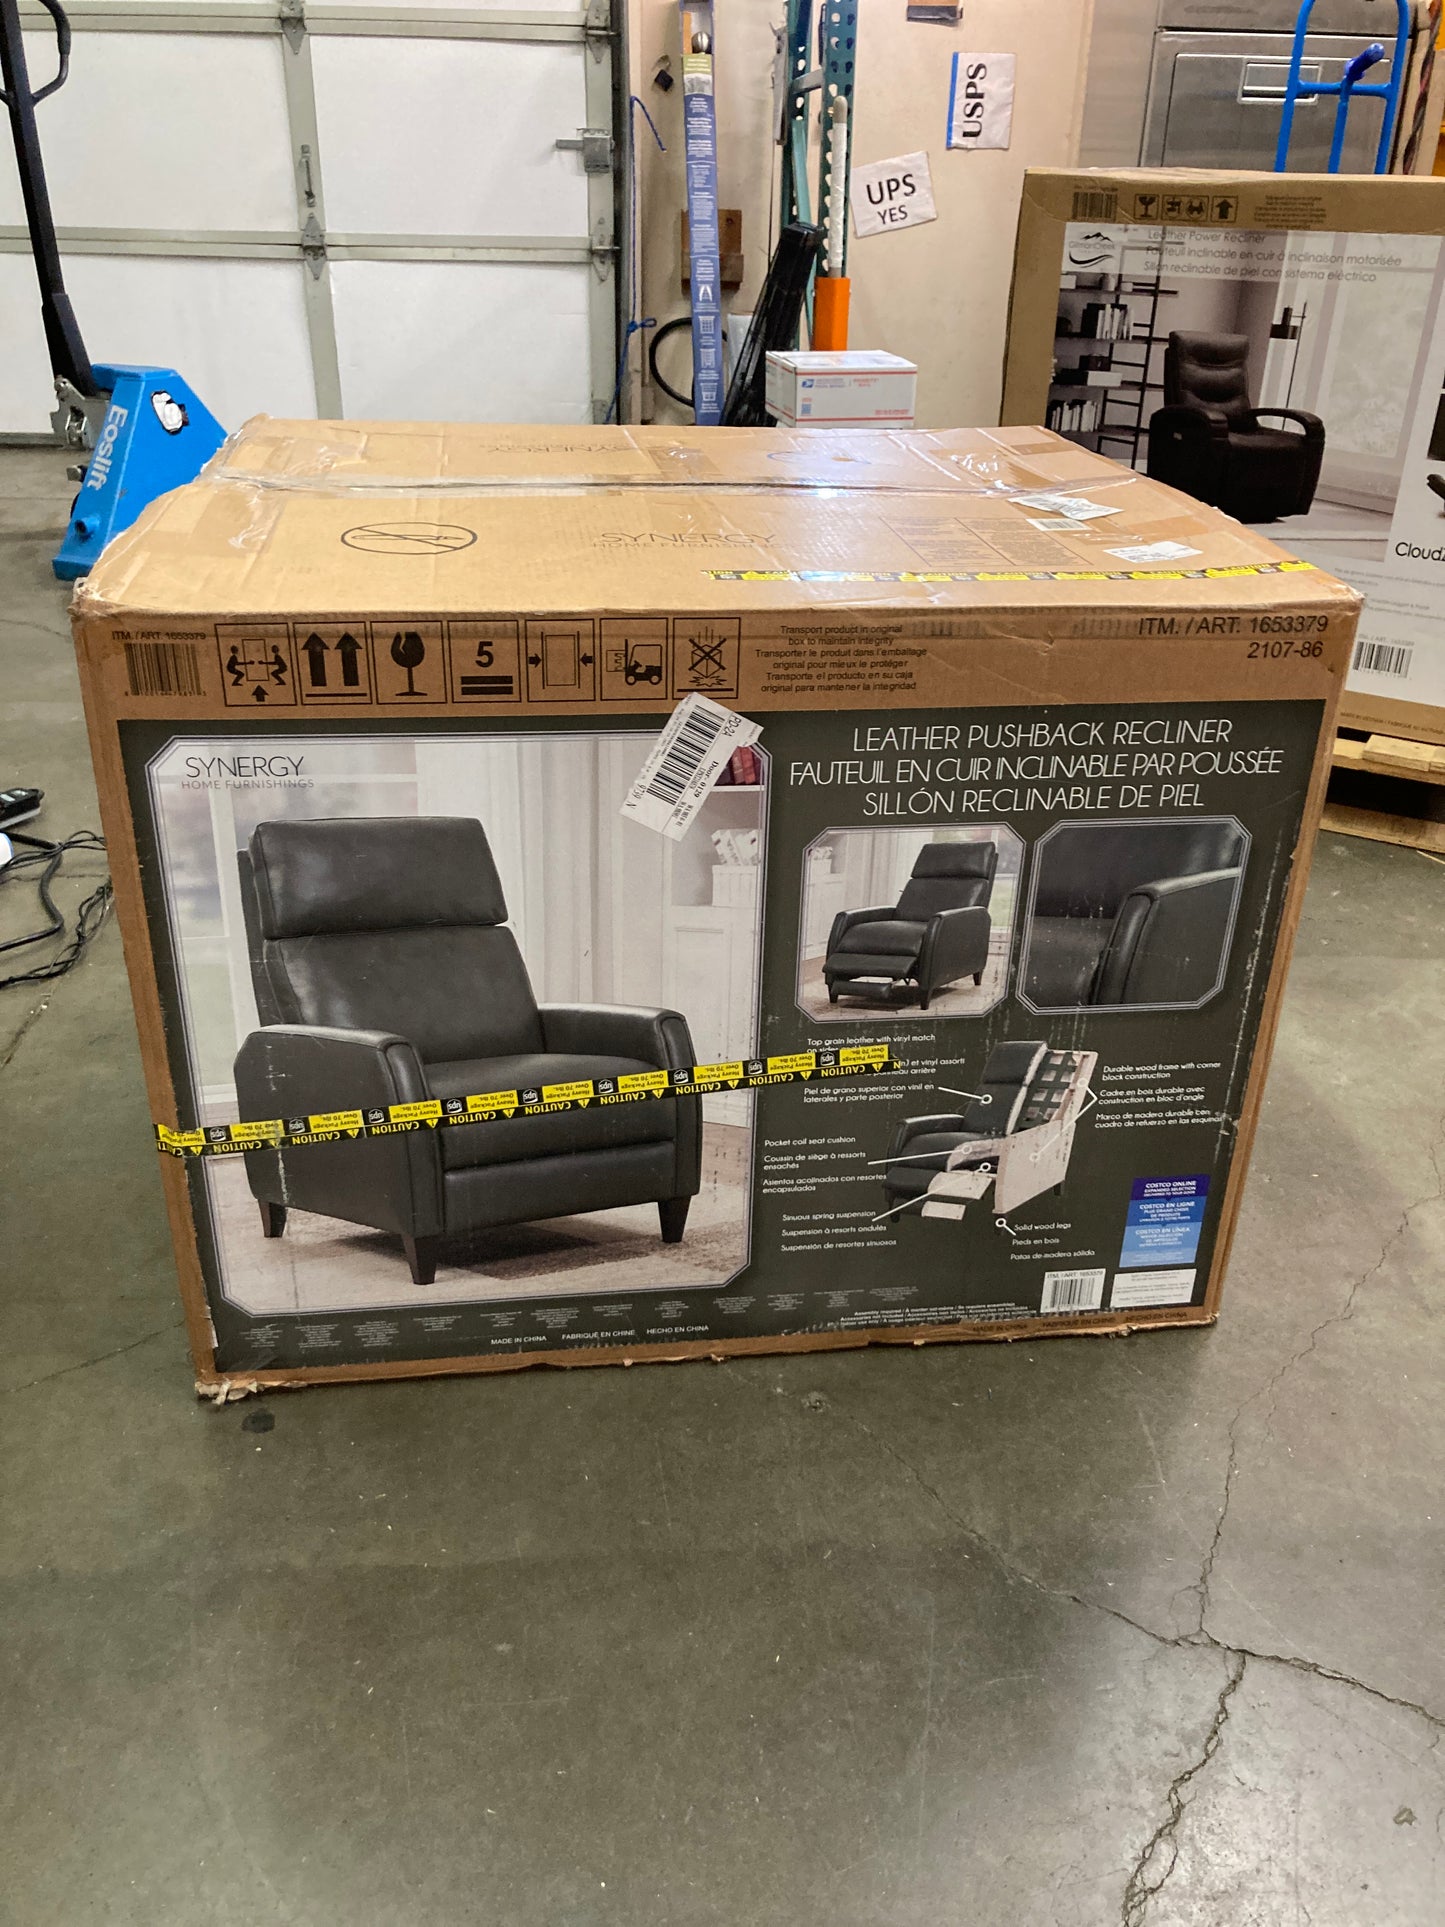 Costco - Decklyn Leather Pushback Recliner - Retail $549 Default Title